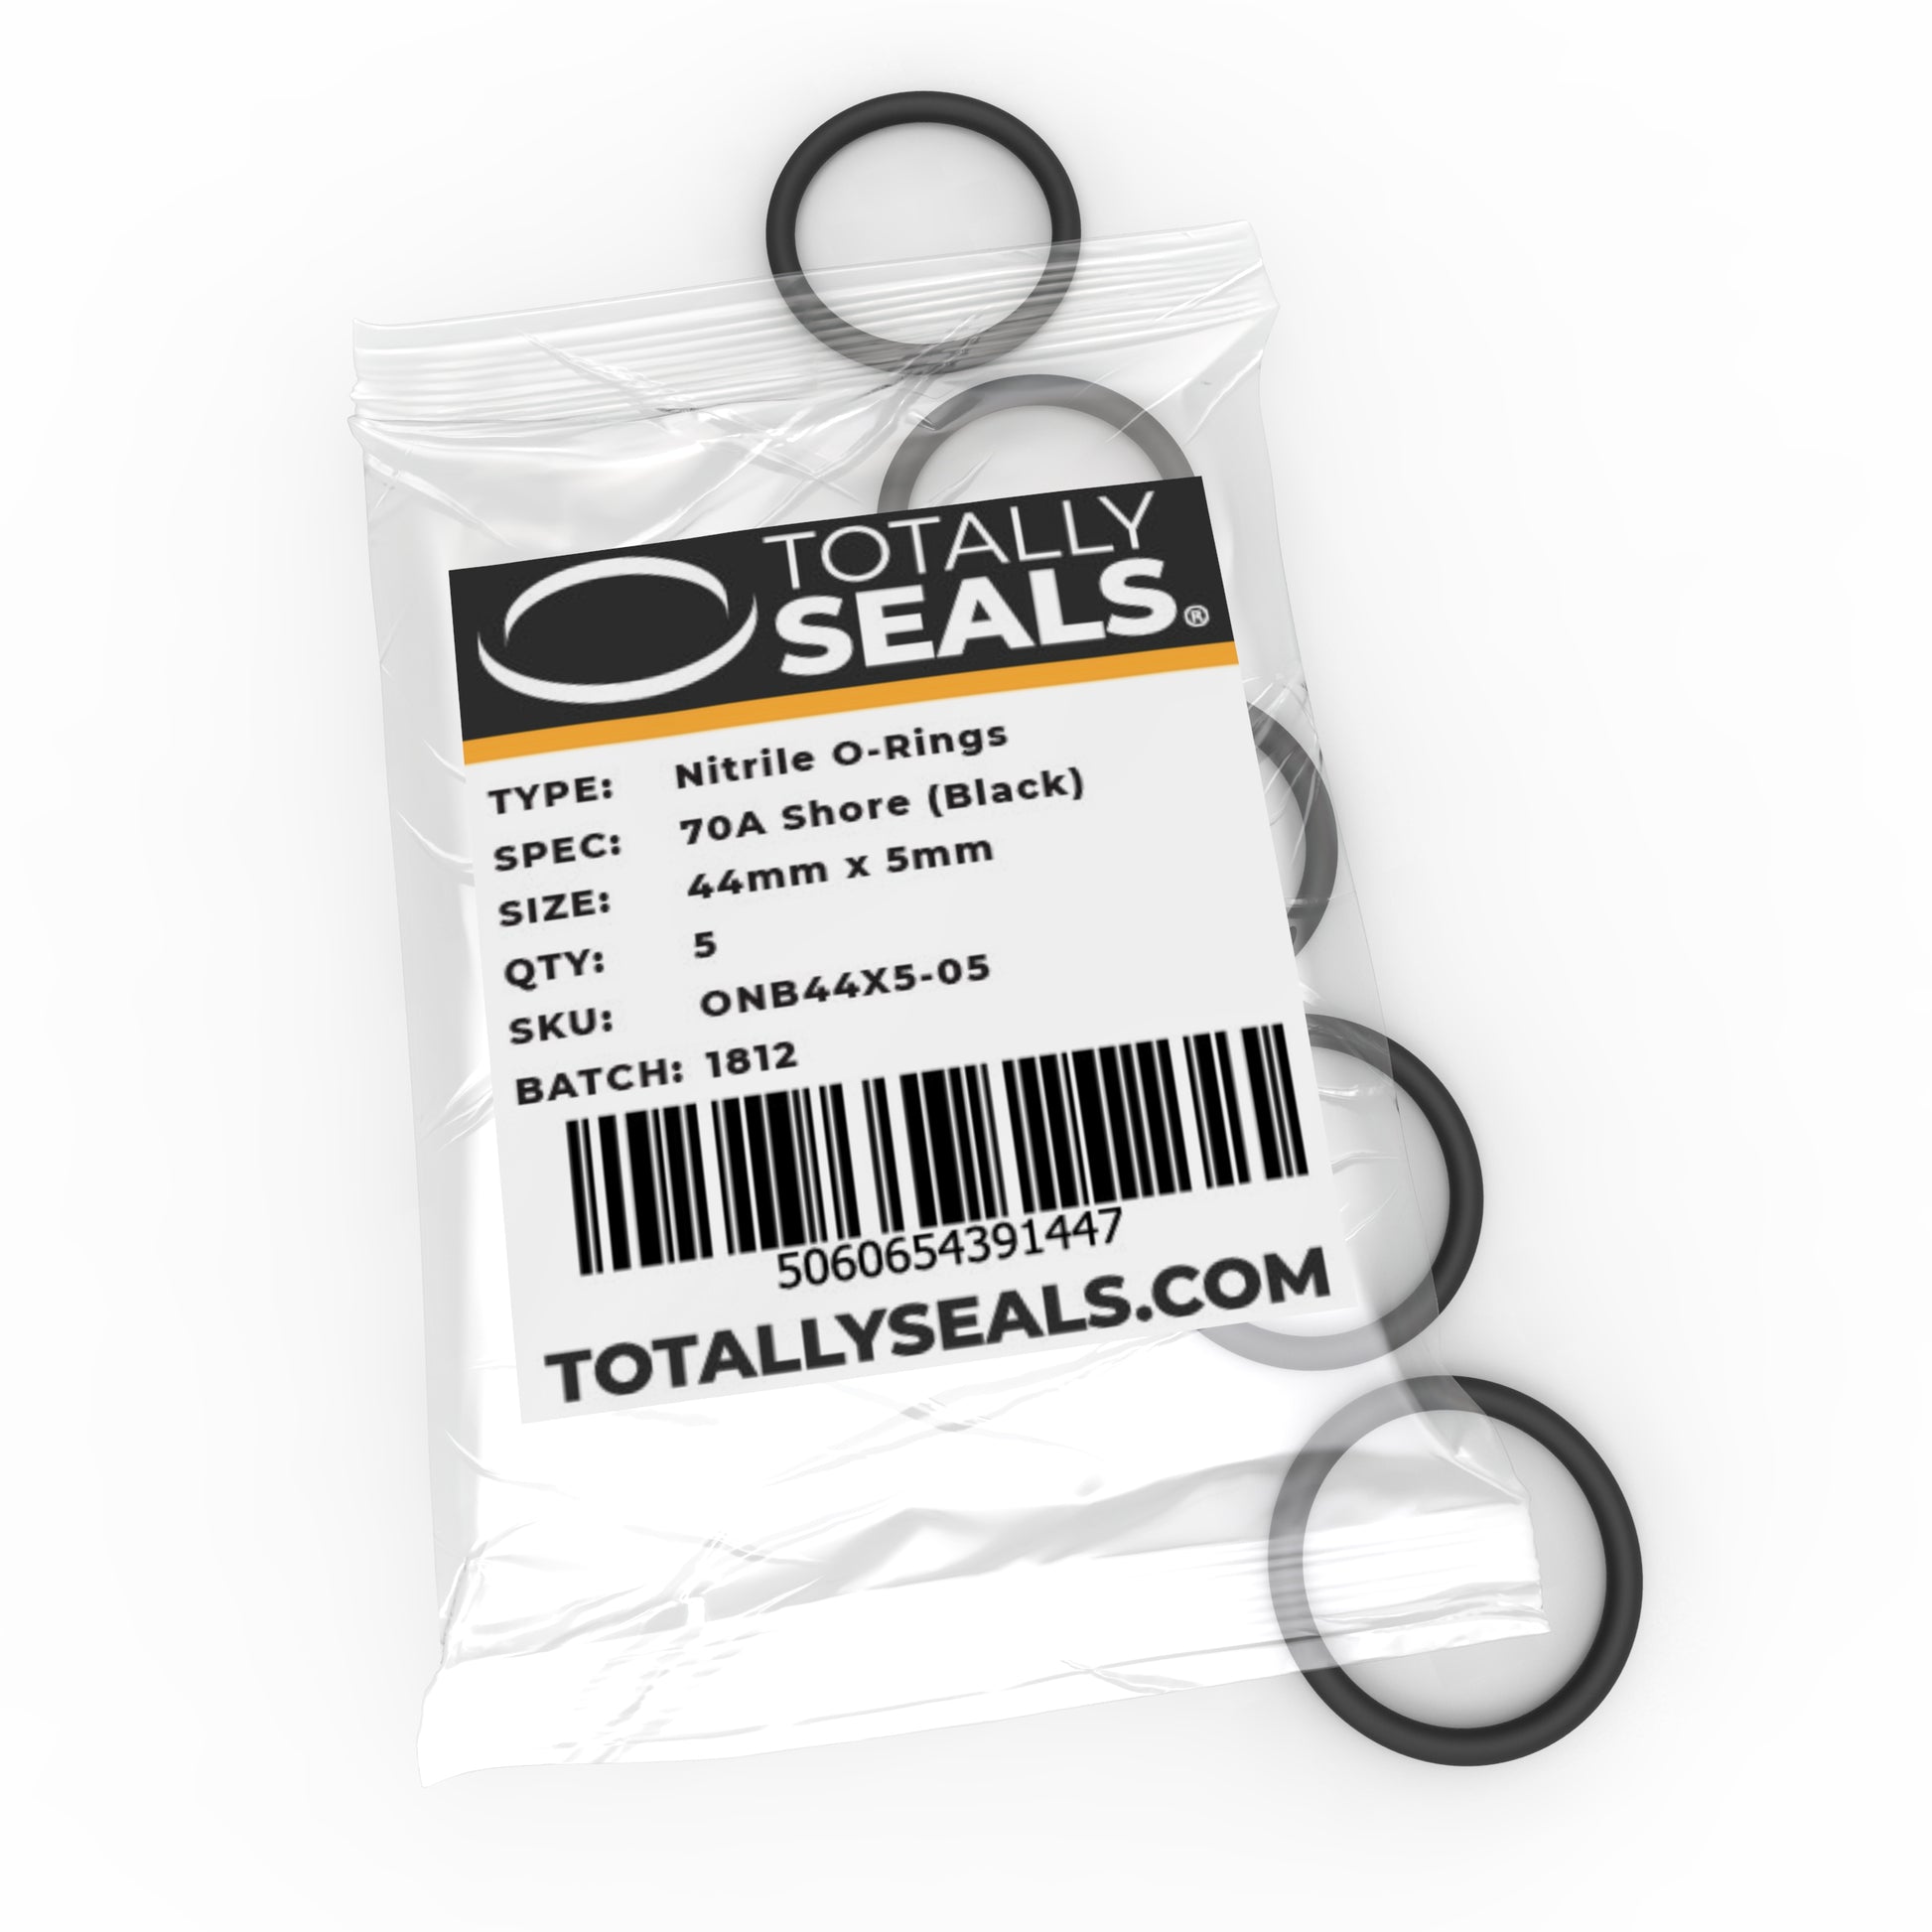 44mm x 5mm (54mm OD) Nitrile O-Rings - Totally Seals®